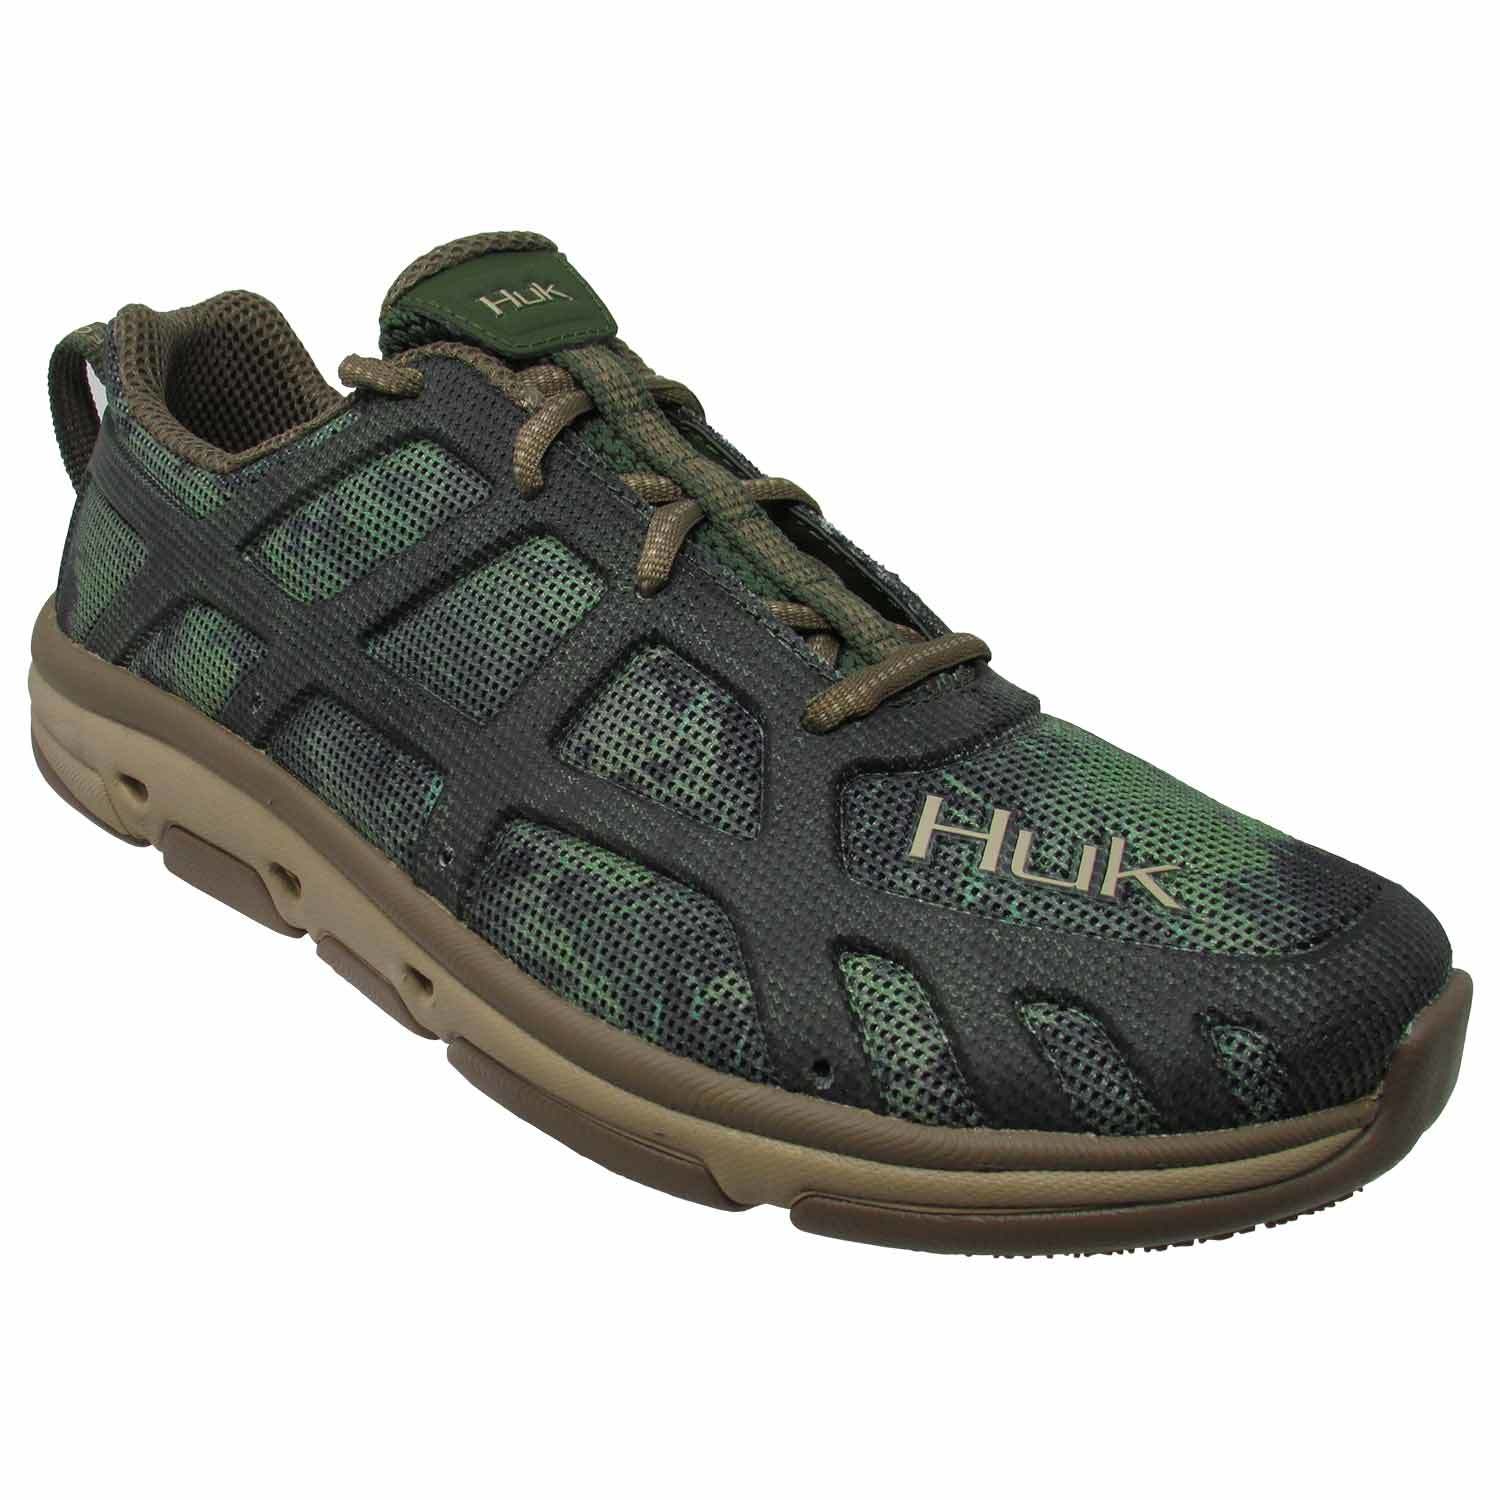 HUK ATTACK PERFORMANCE Fishing Shoes Model H8011000185 Mens Size